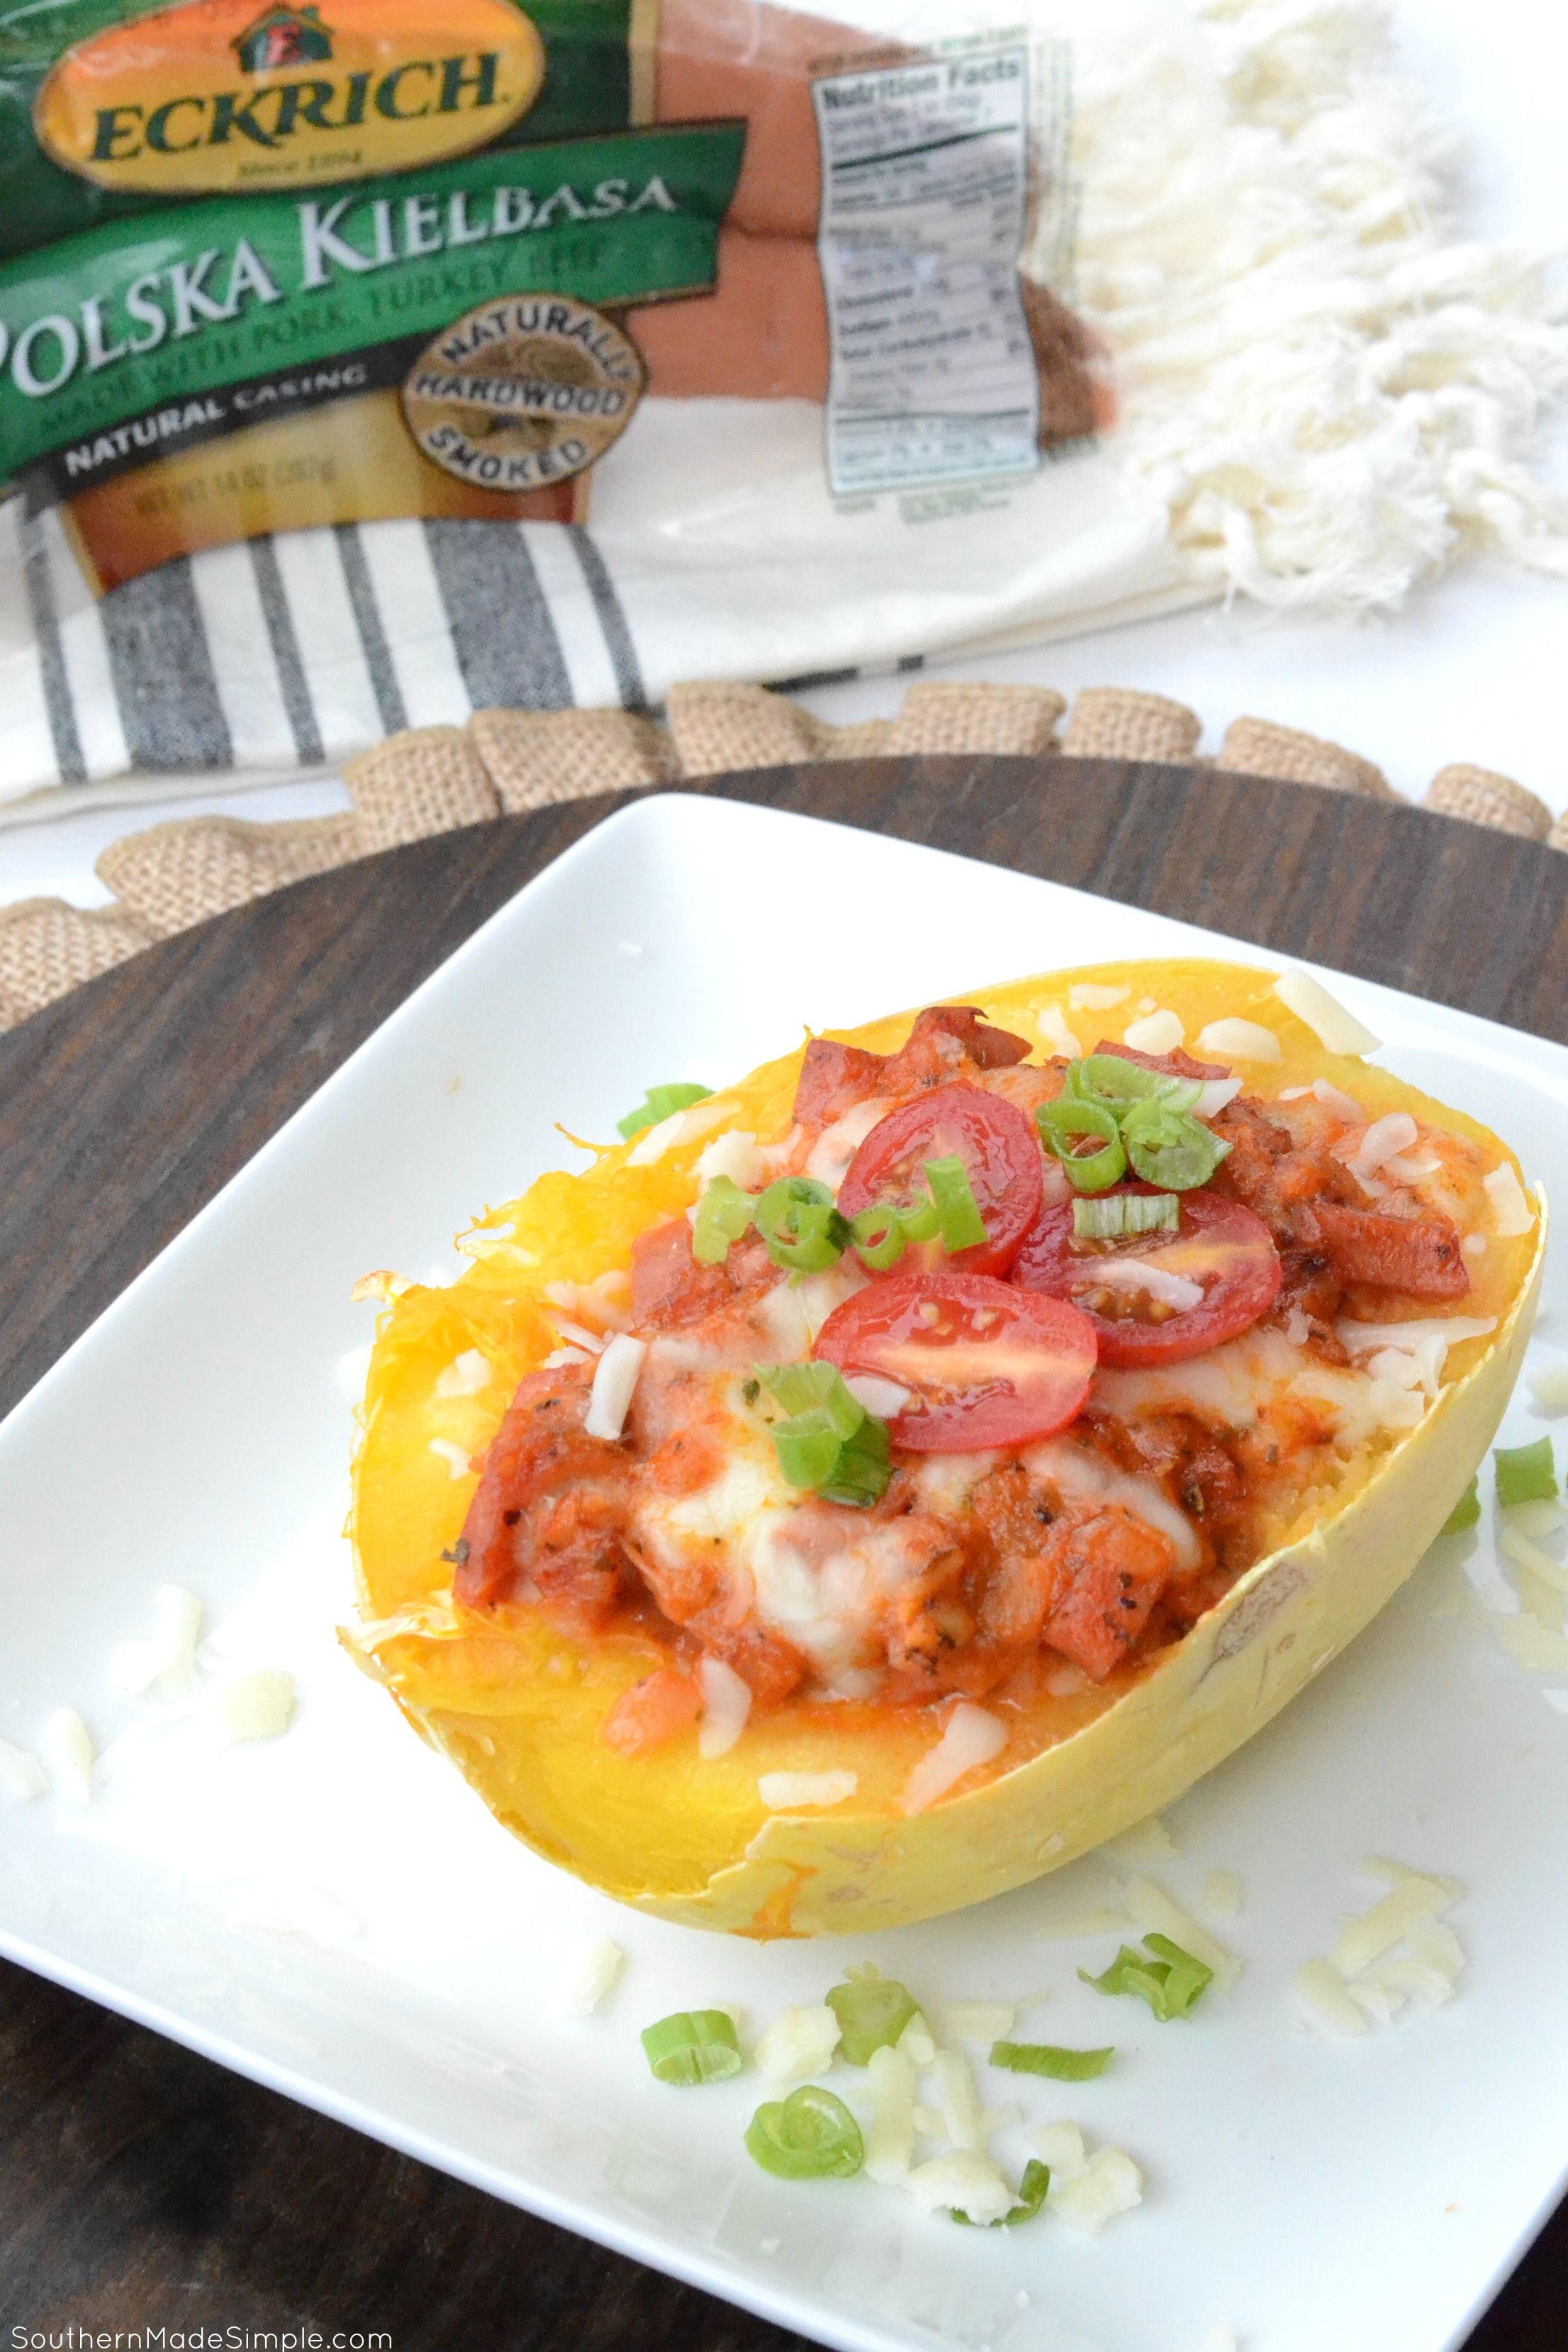 Ready to revamp your family weeknight meals? This Cheesy Smoked Sausage Stuffed Spaghetti Squash is a fun twist on classic spaghetti with a simple & healthier twist! #EverydayEckrich #ad